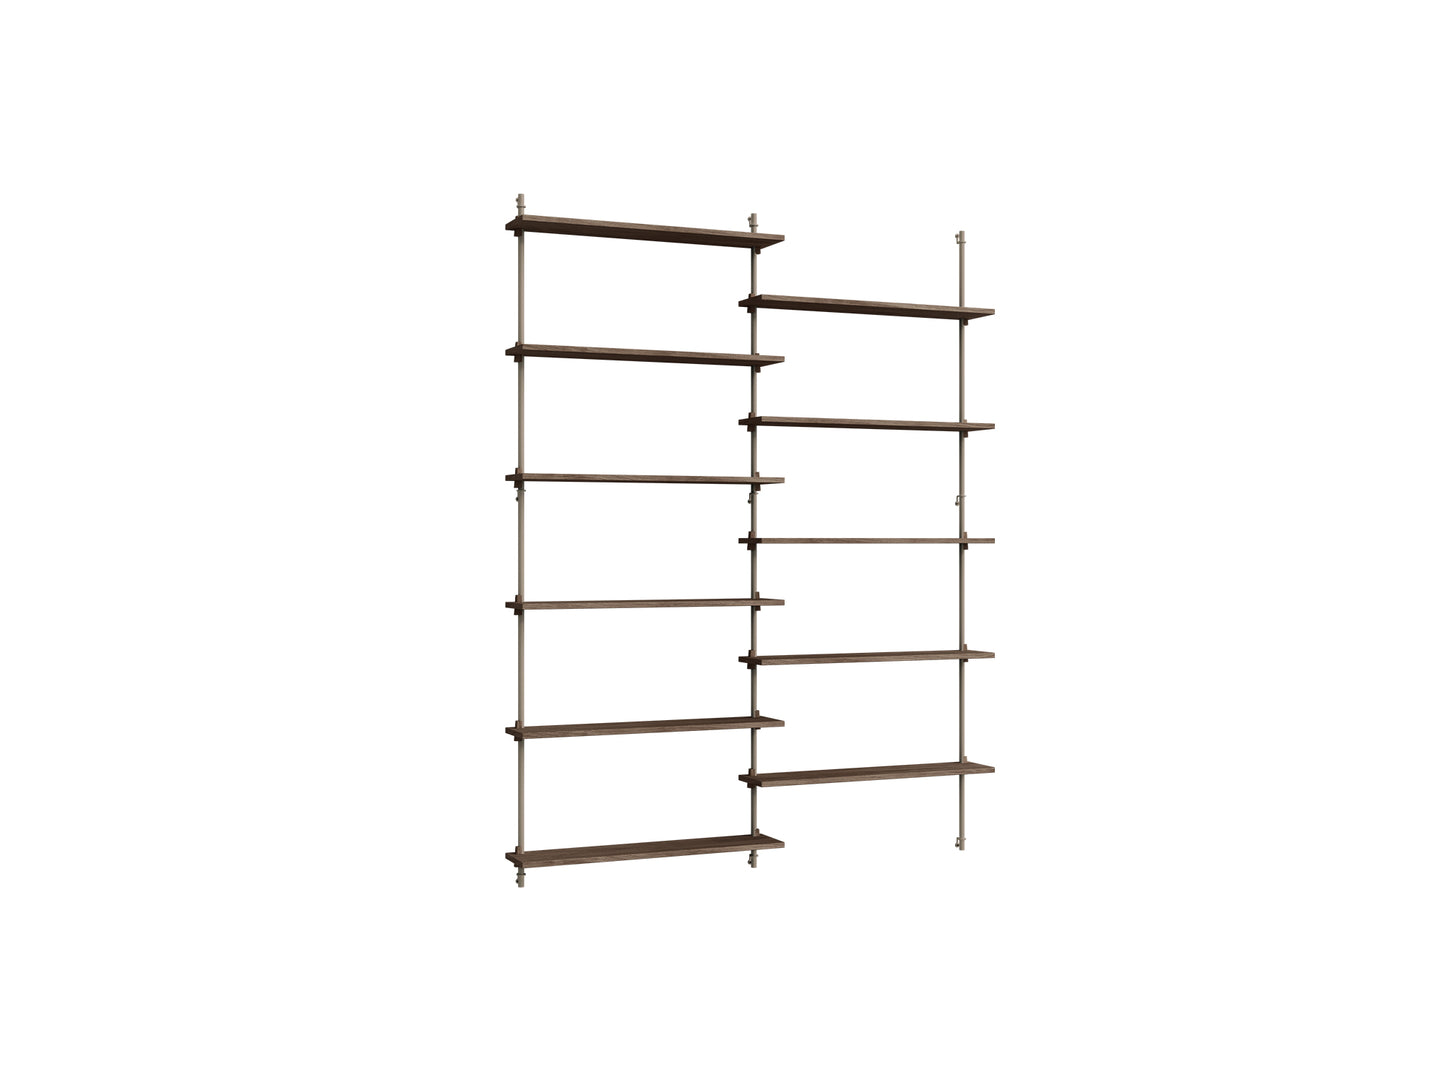 Wall Shelving System Sets (200 cm) by Moebe - WS.200.2 / Warm Grey Uprights / Smoked Oak